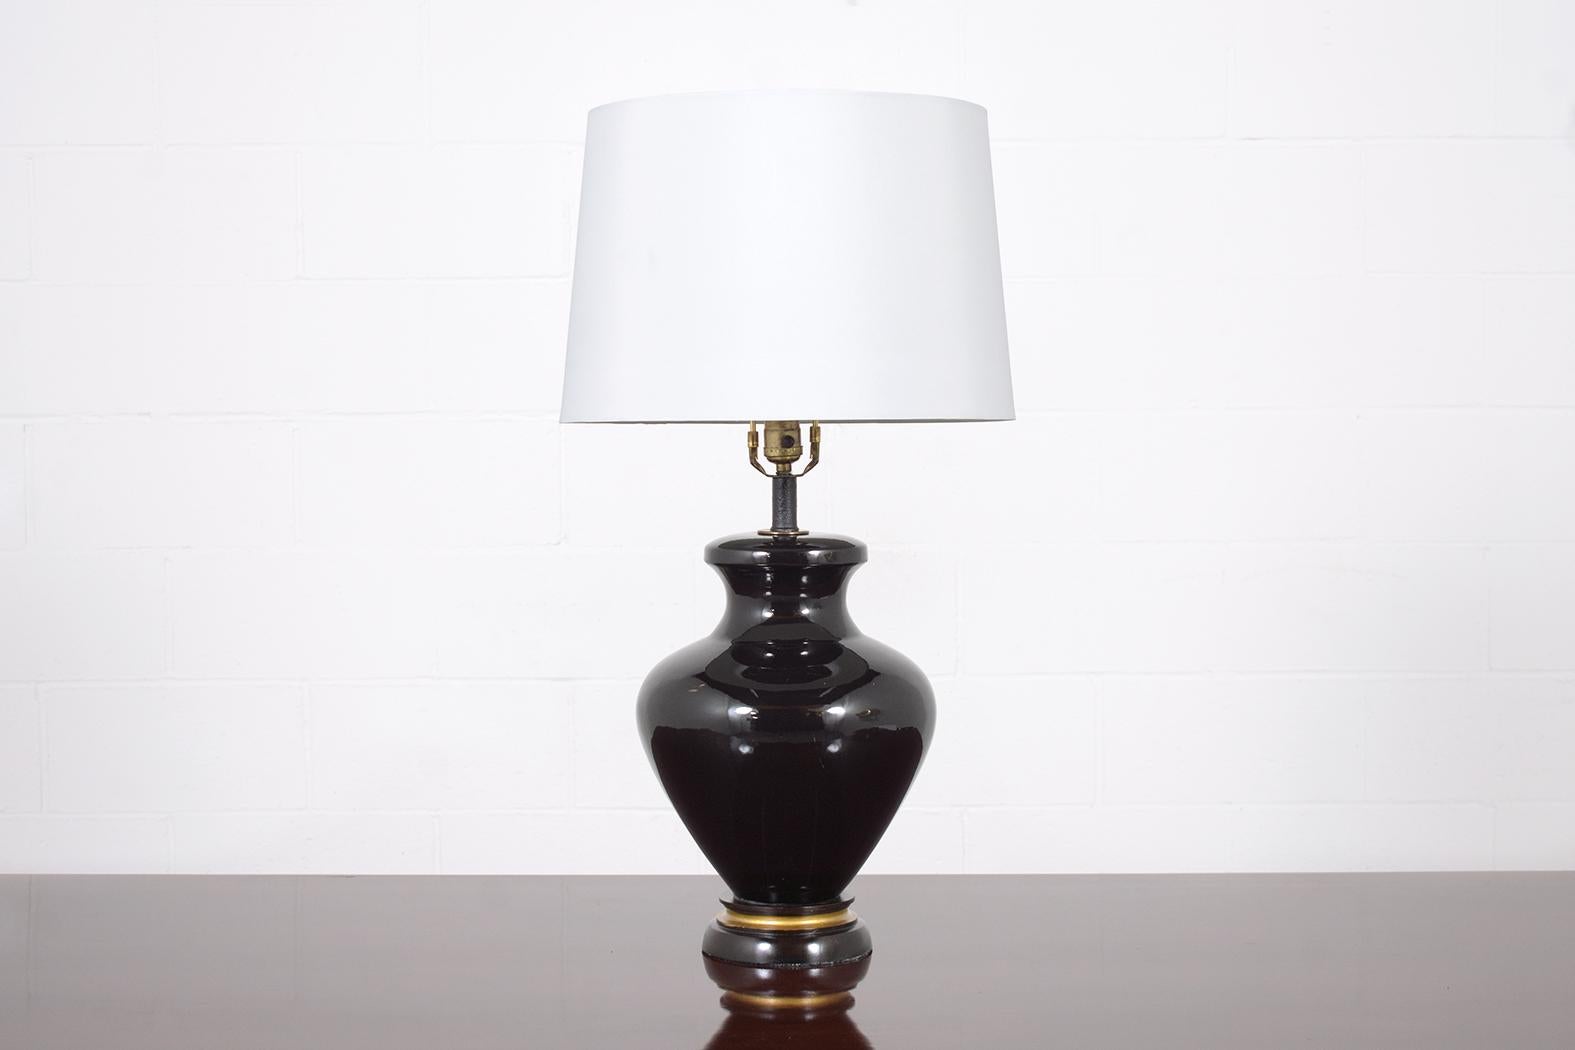 Discover the allure of our authentic vintage Chinese table lamp, intricately crafted from top-quality ceramic and perfectly functioning. This remarkable piece features an urn vase design, adorned with an eye-catching, hand-painted deep black hue and